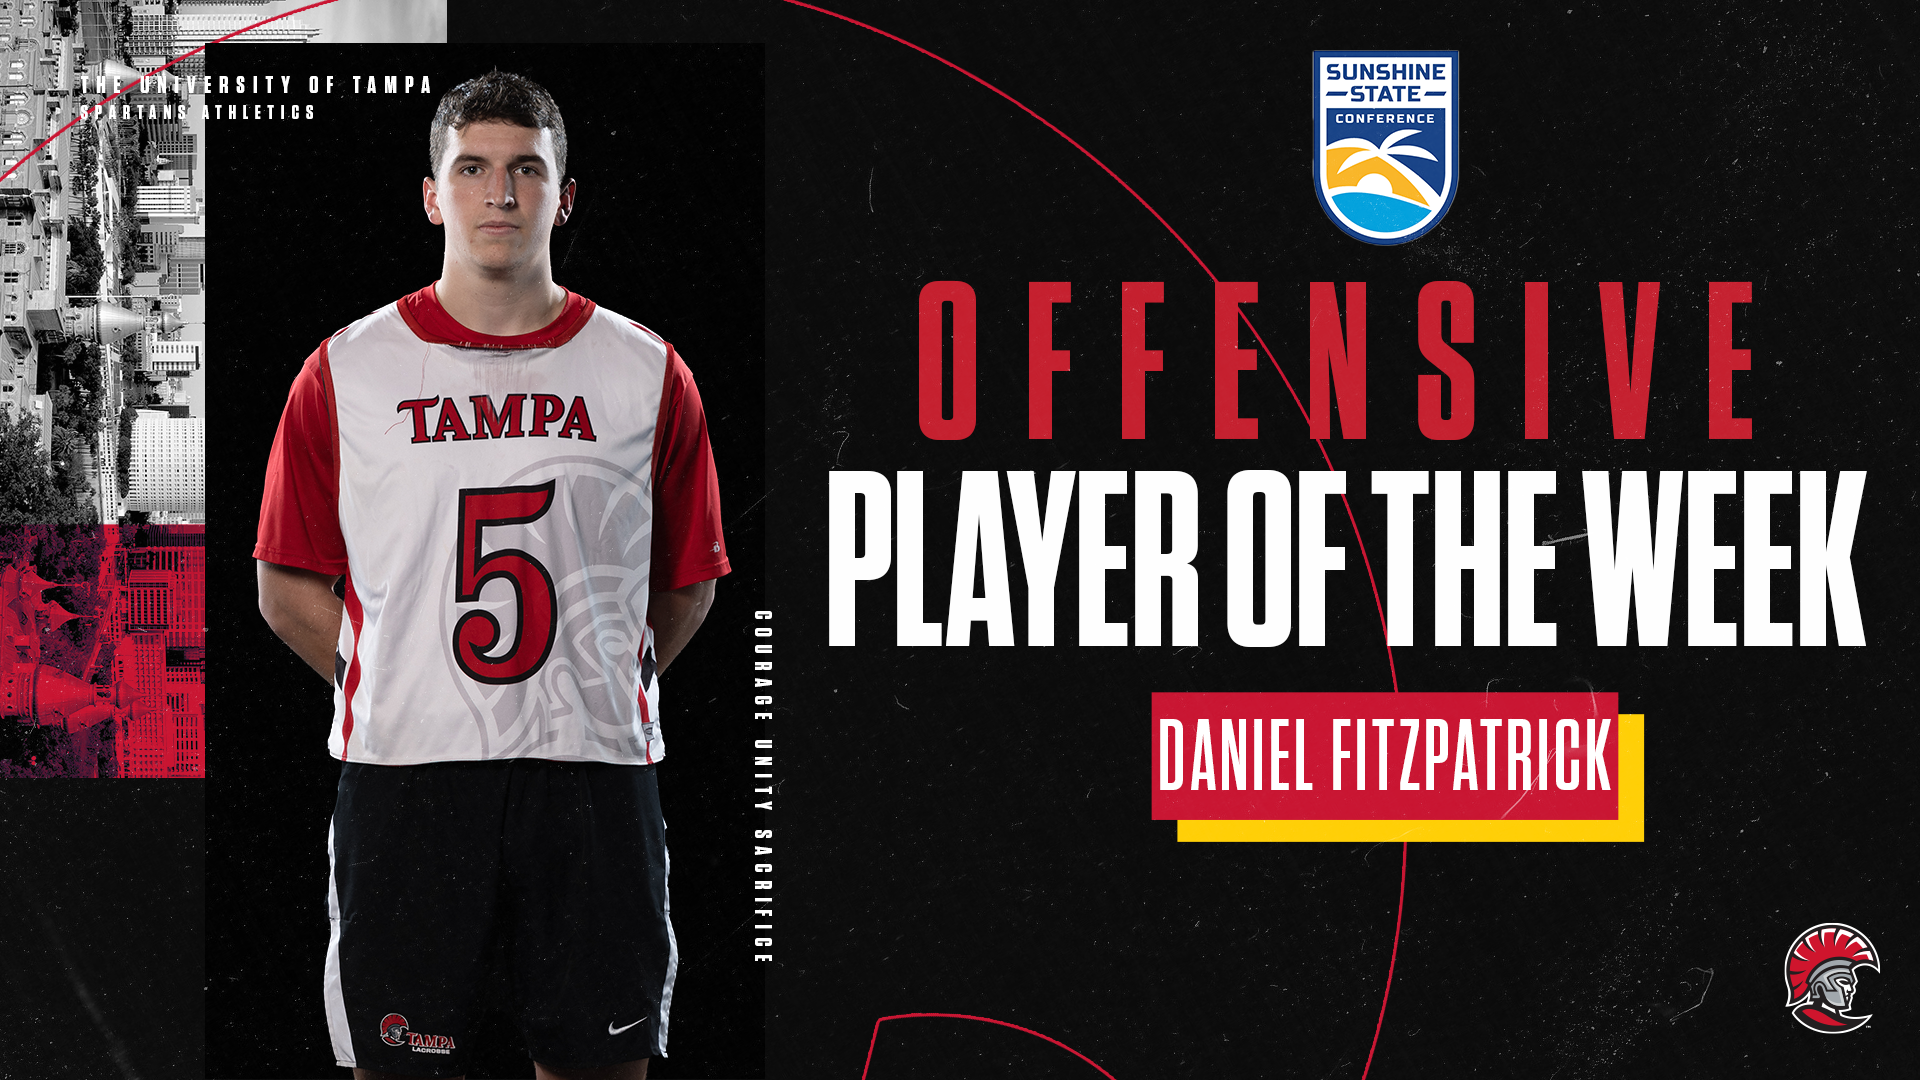 Daniel Fitzpatrick Named SSC Offensive Player of the Week